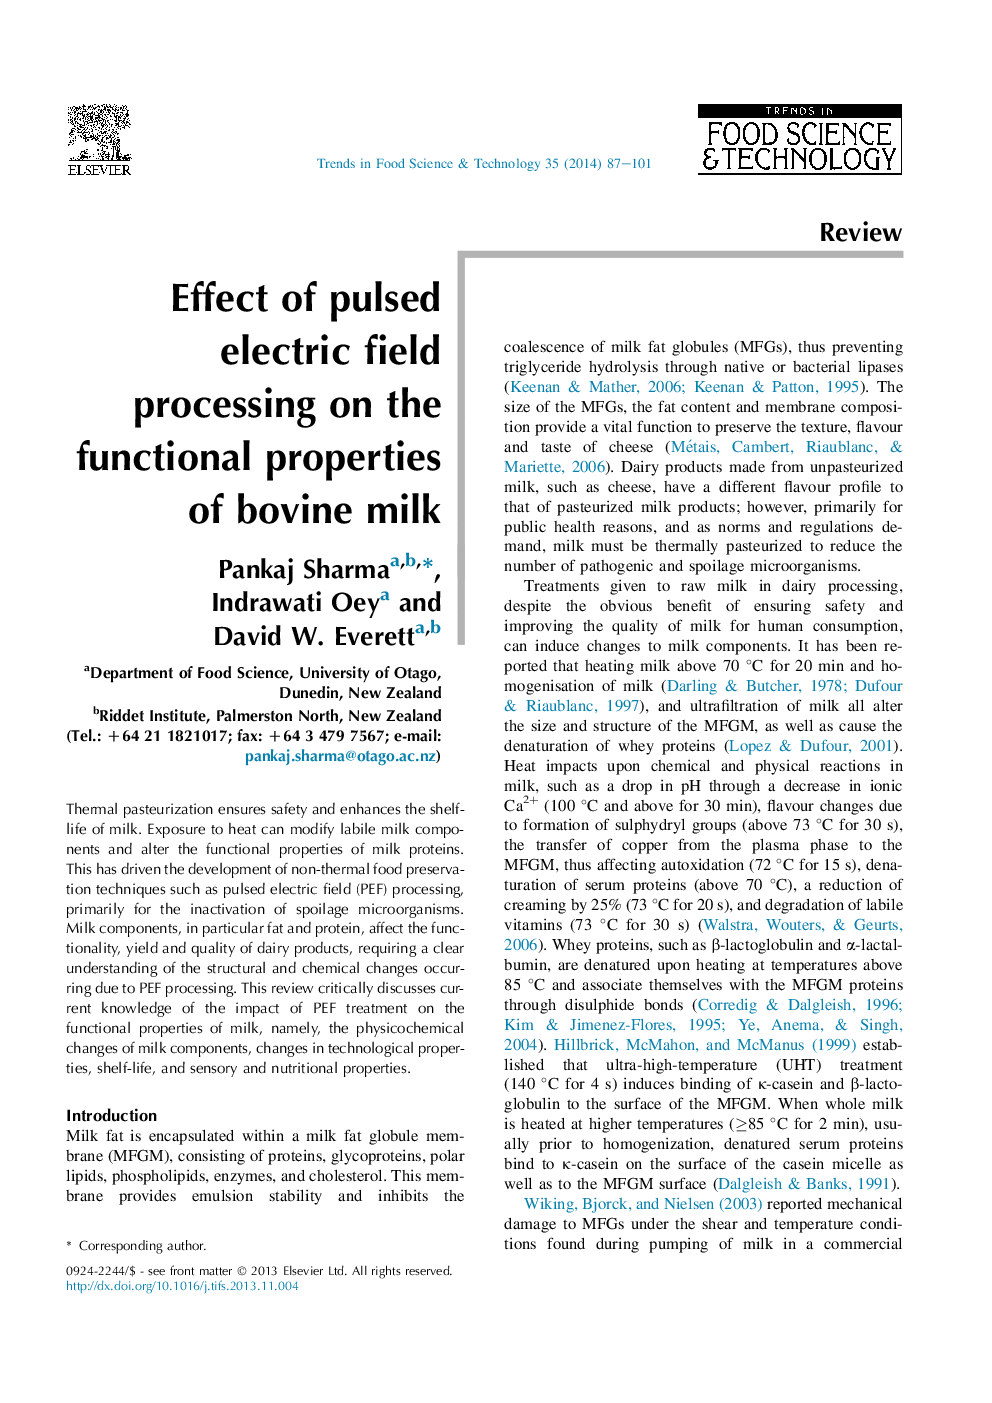 Effect of pulsed electric field processing on the functional properties of bovine milk